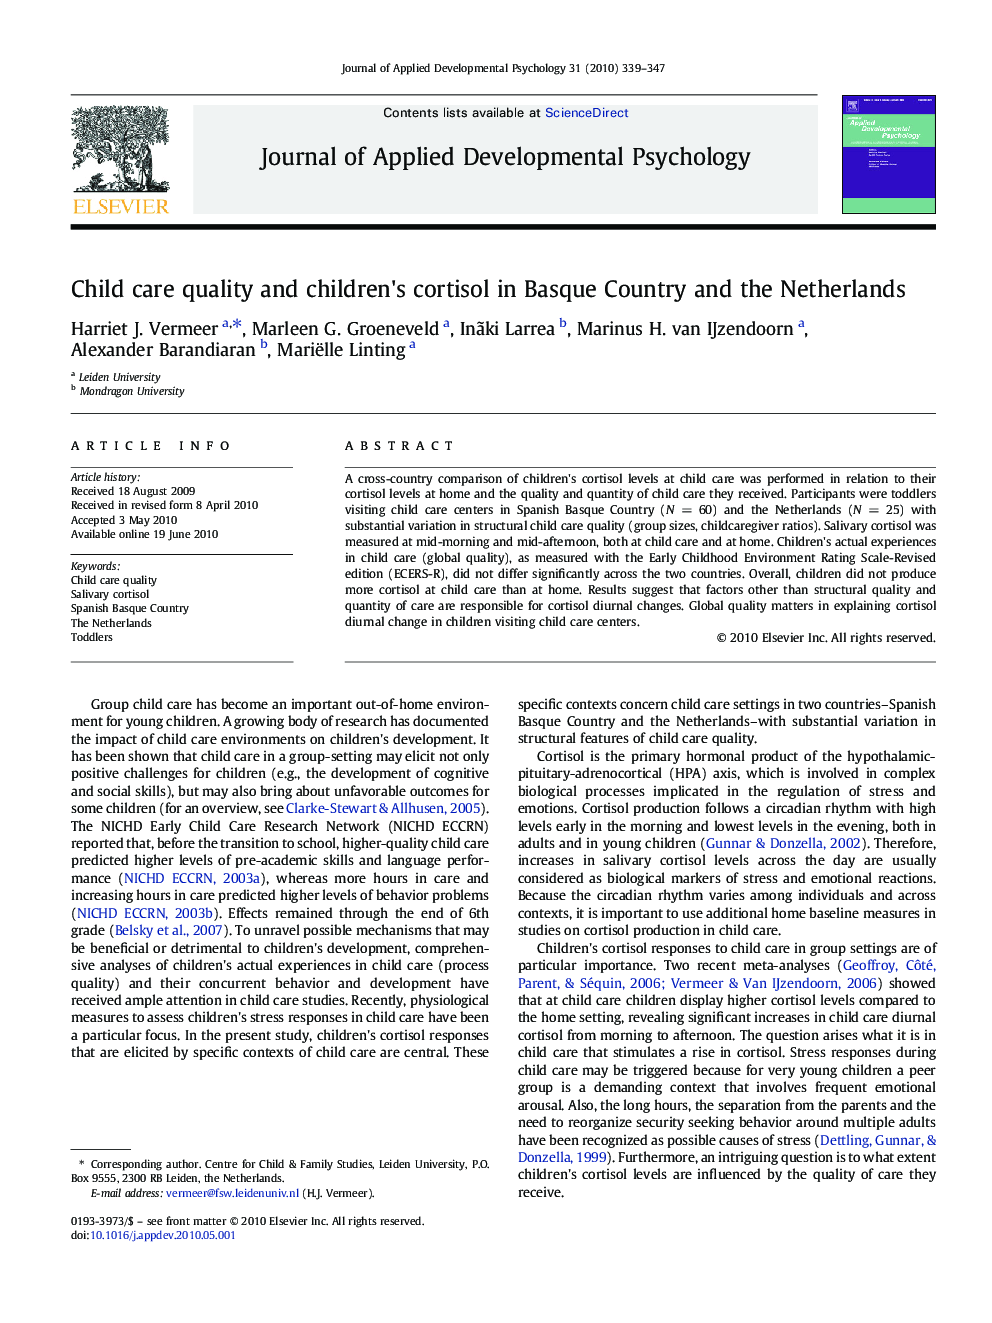 Child care quality and children's cortisol in Basque Country and the Netherlands